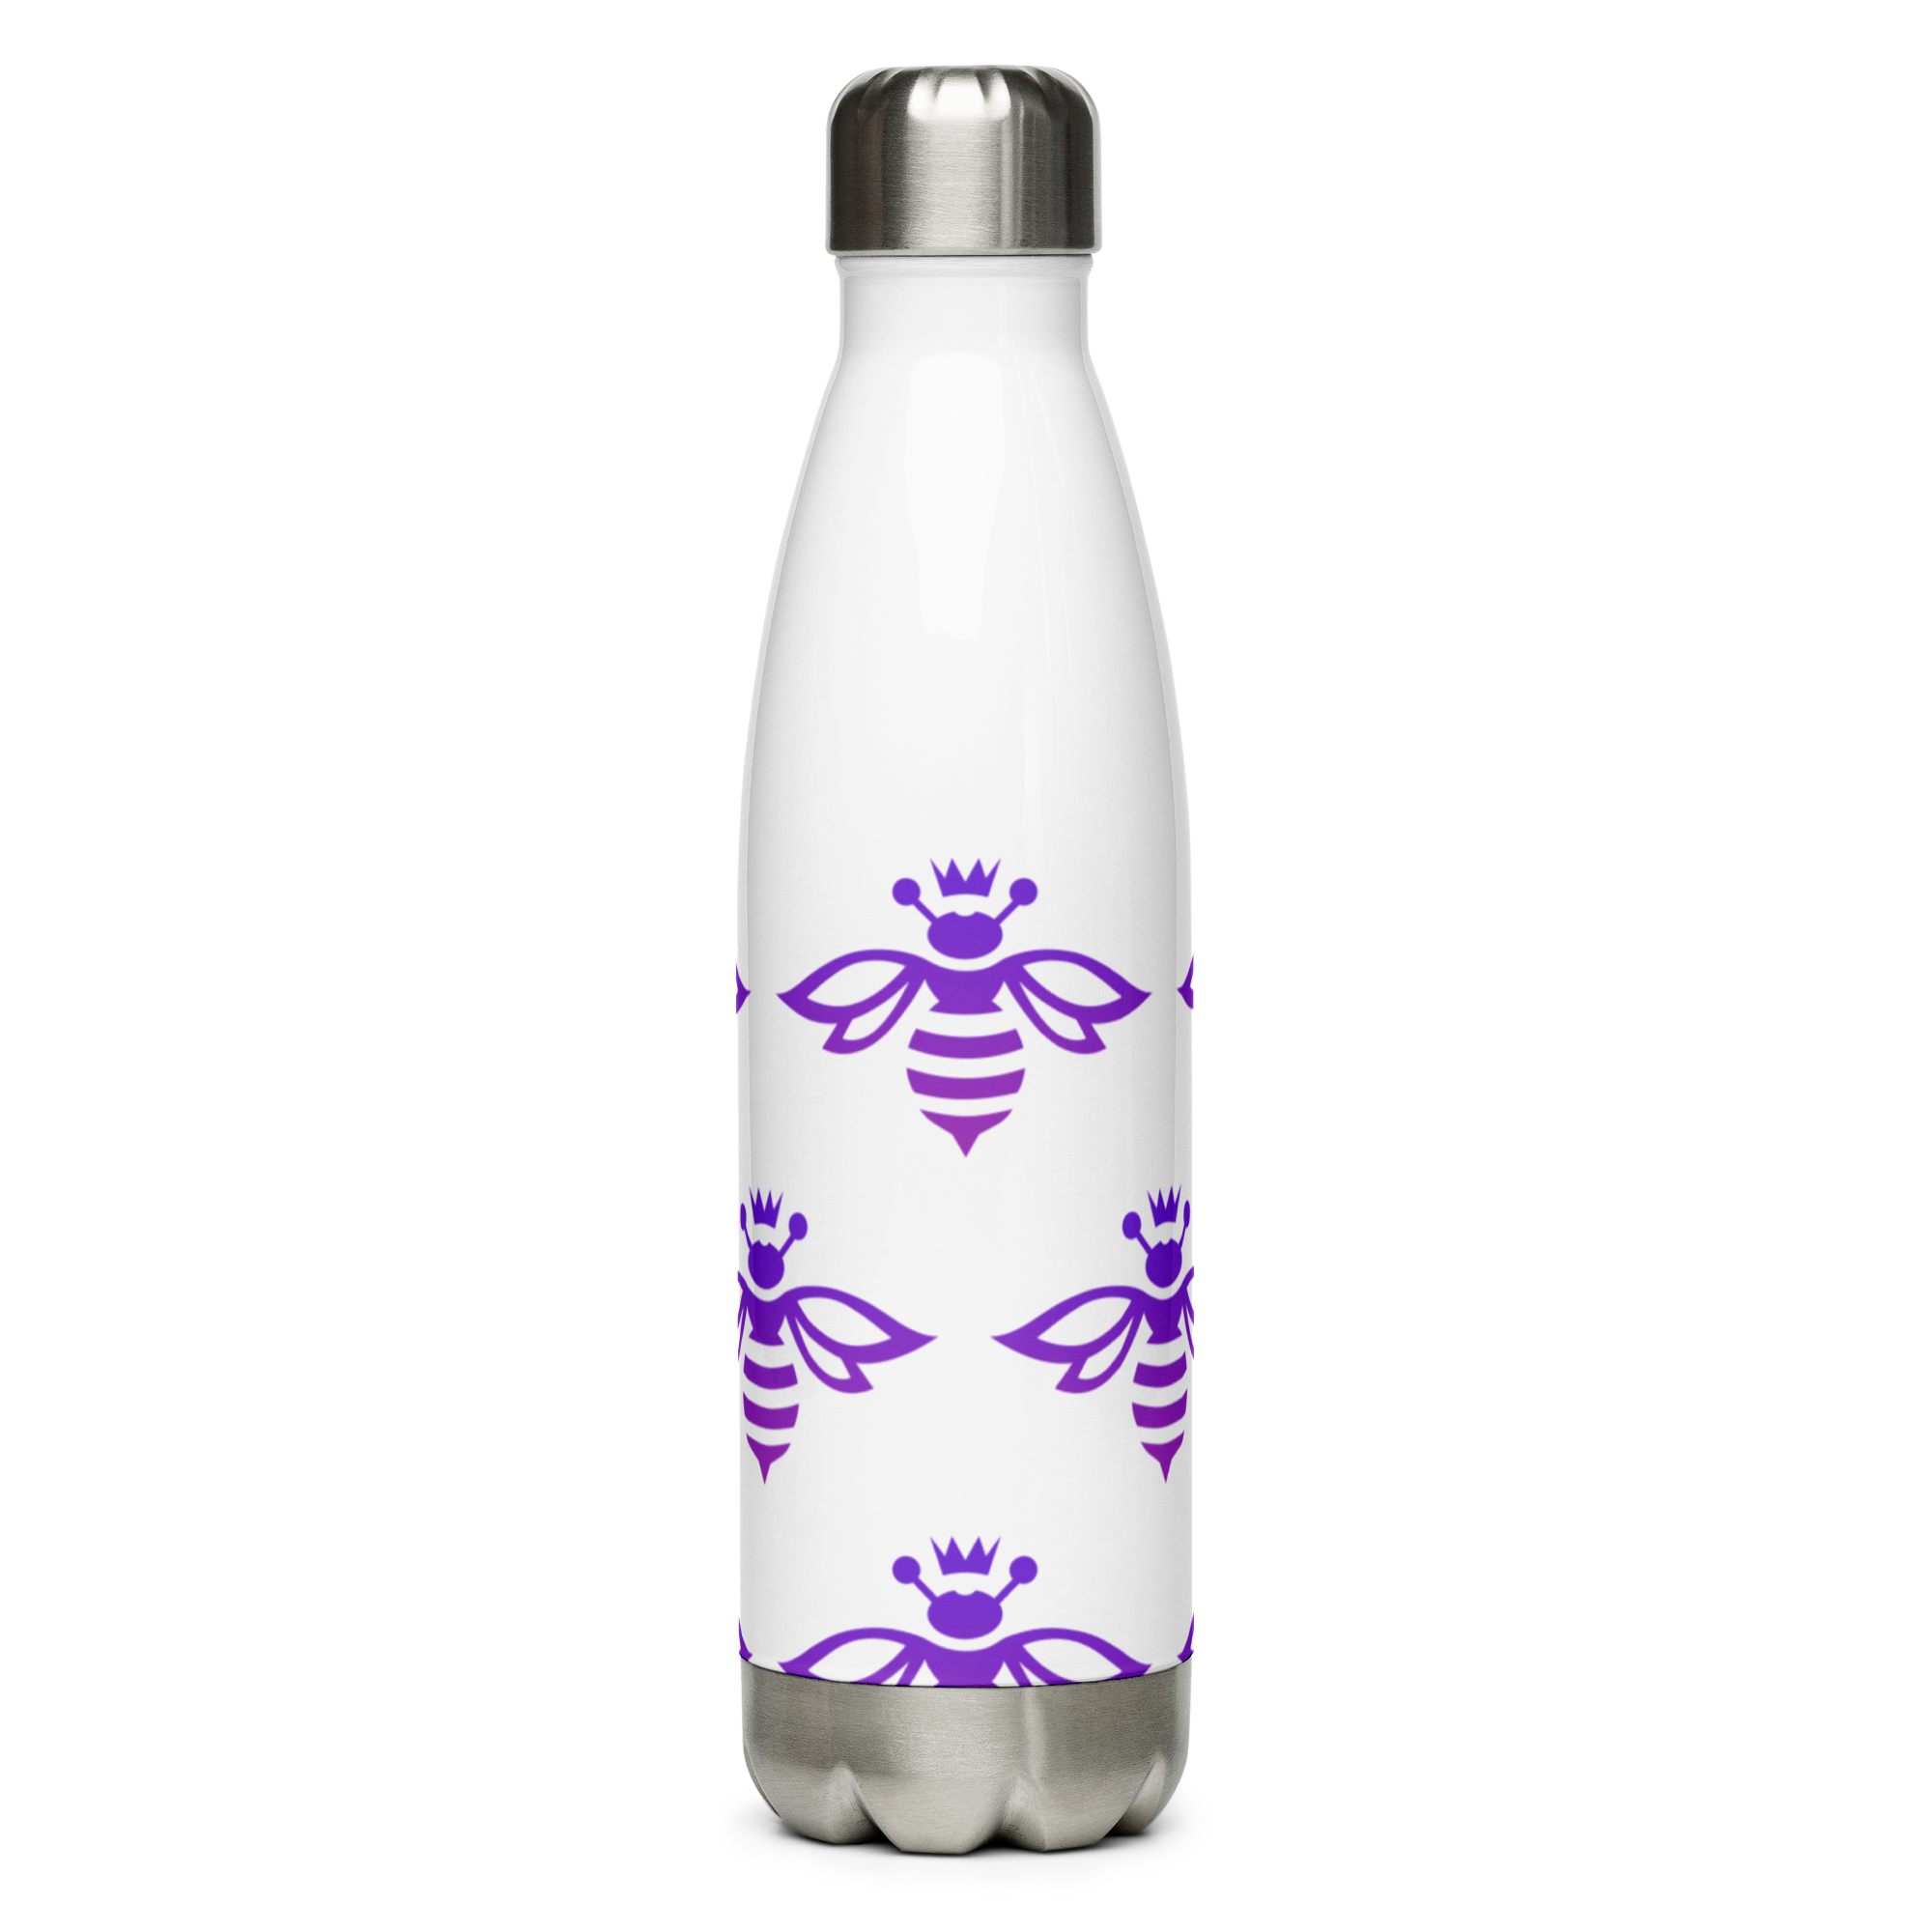 https://purplebee.org/wp-content/uploads/stainless-steel-water-bottle-white-17oz-front-631237b1f40f1.png